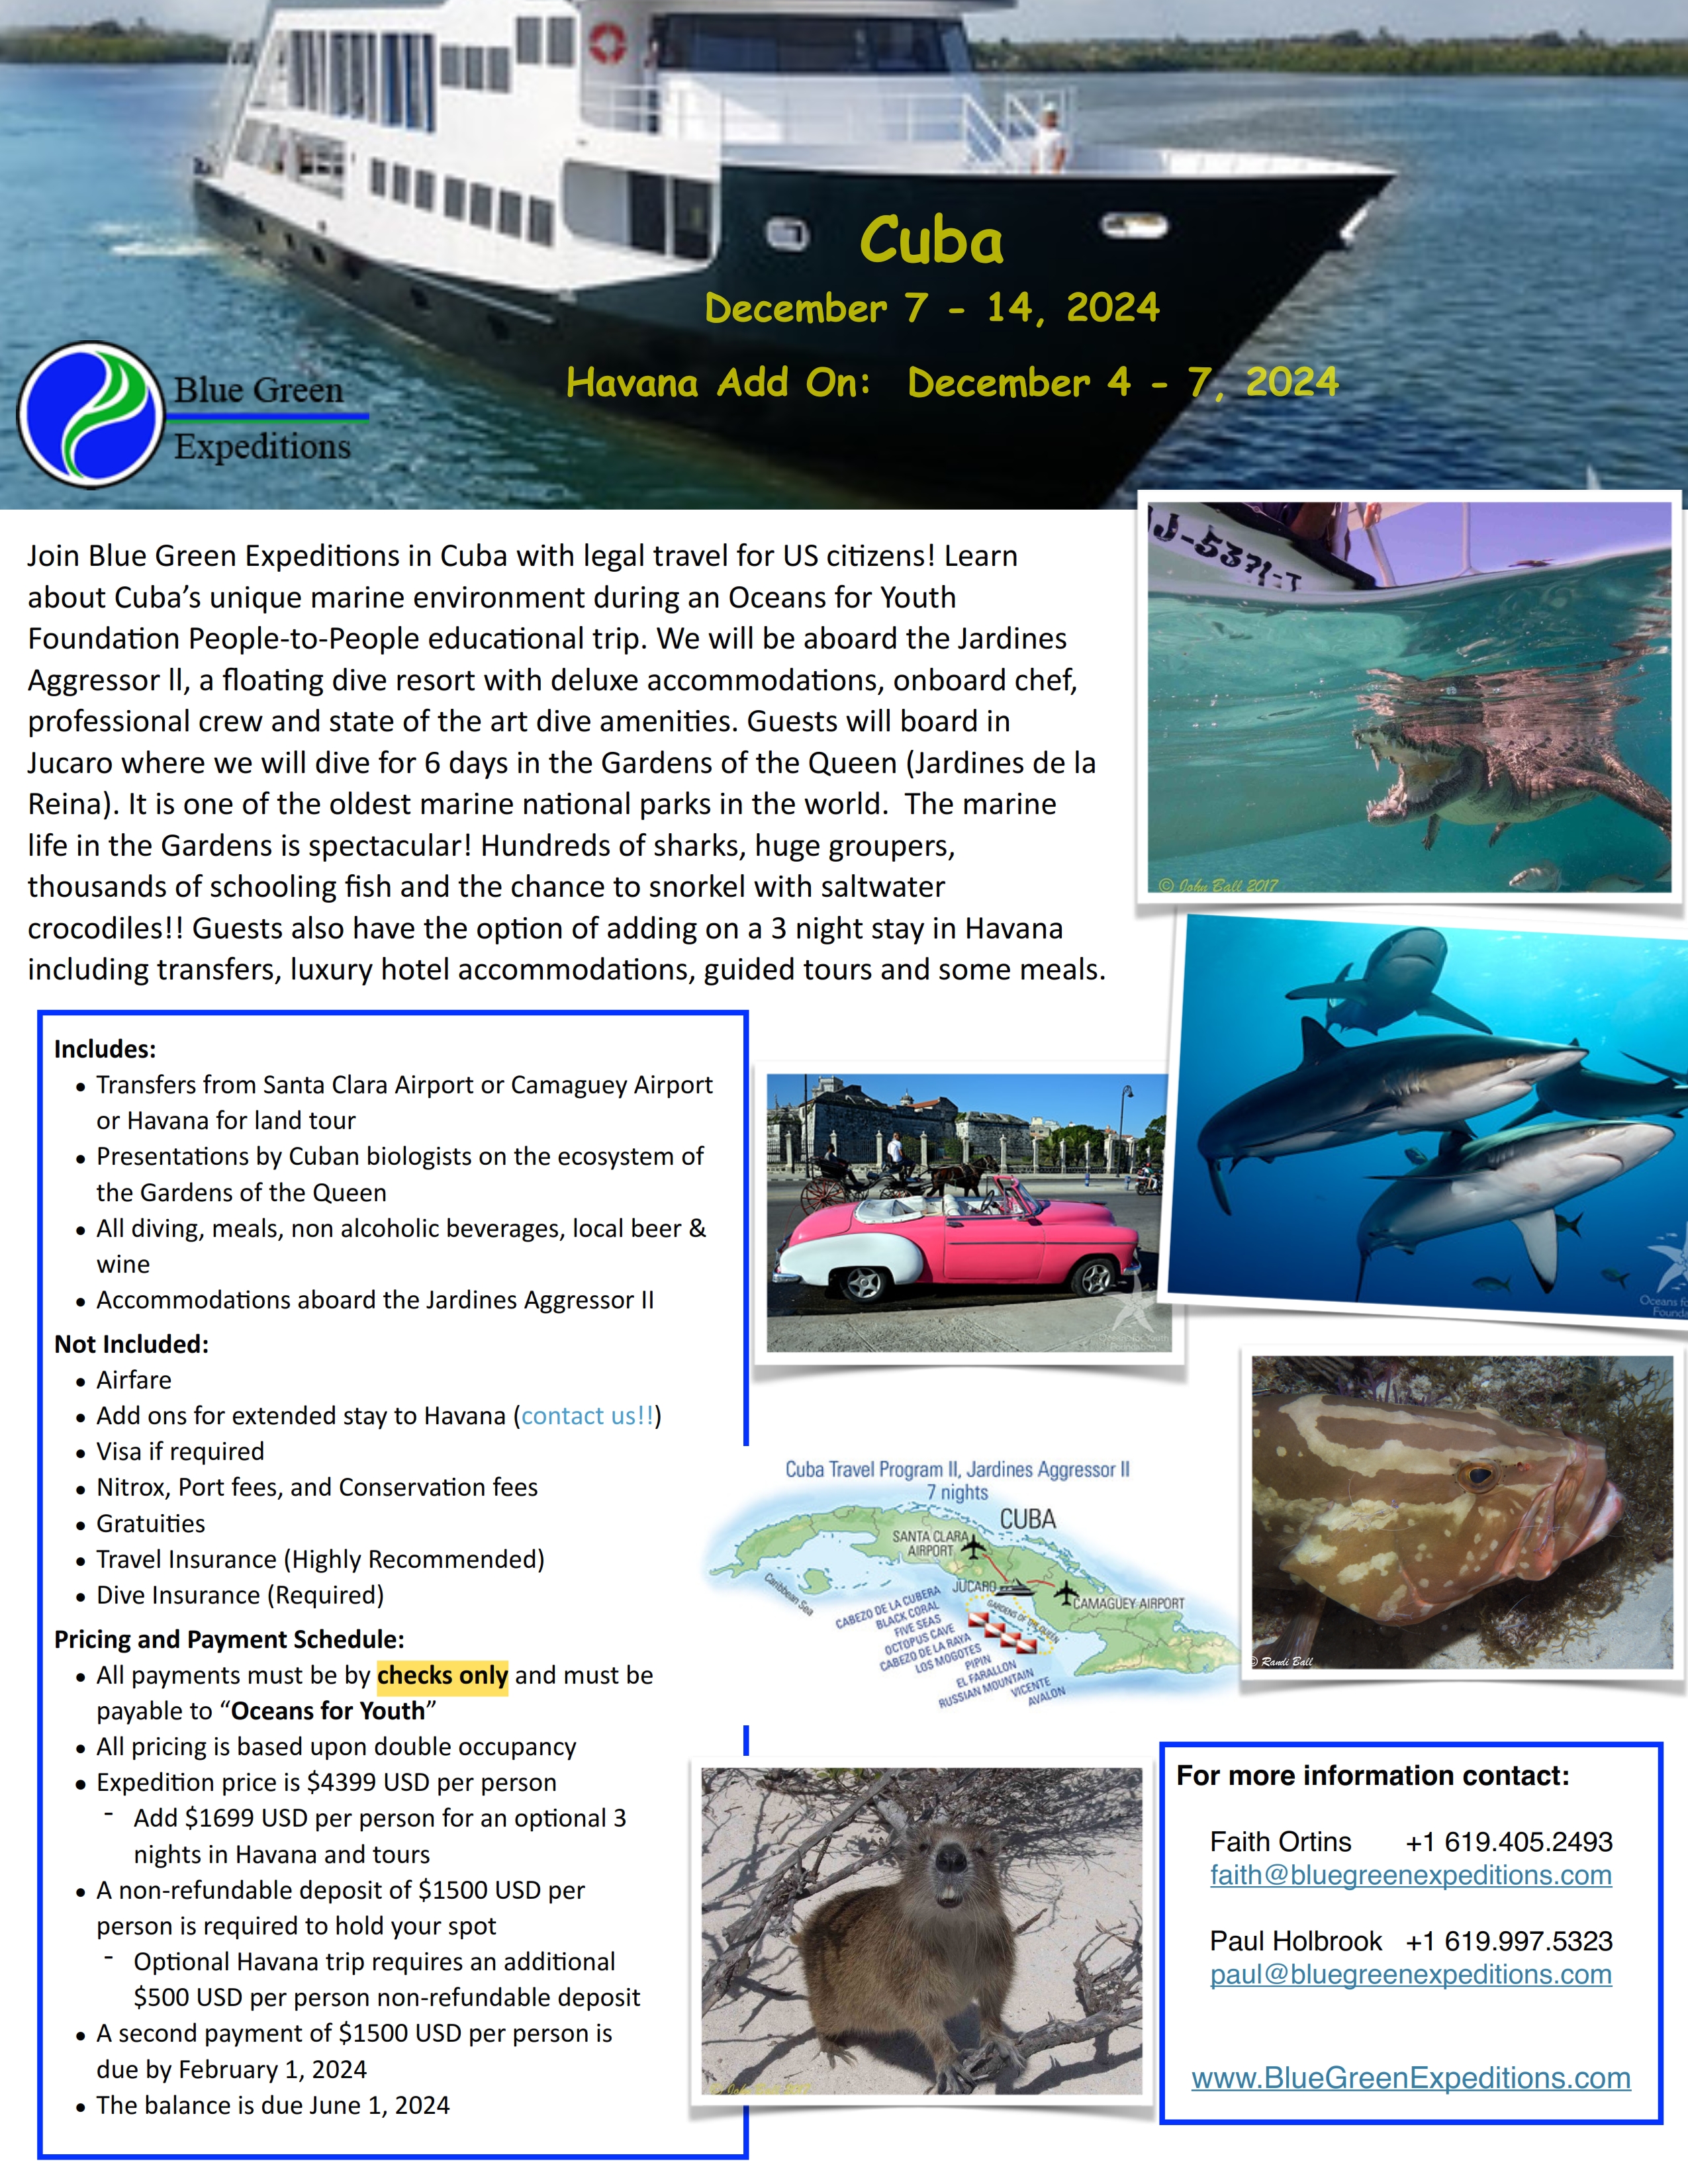 Cuba 2024 expedition - December 7 - 14, 2024, cost and trip details. PDF flyer contains the same information.